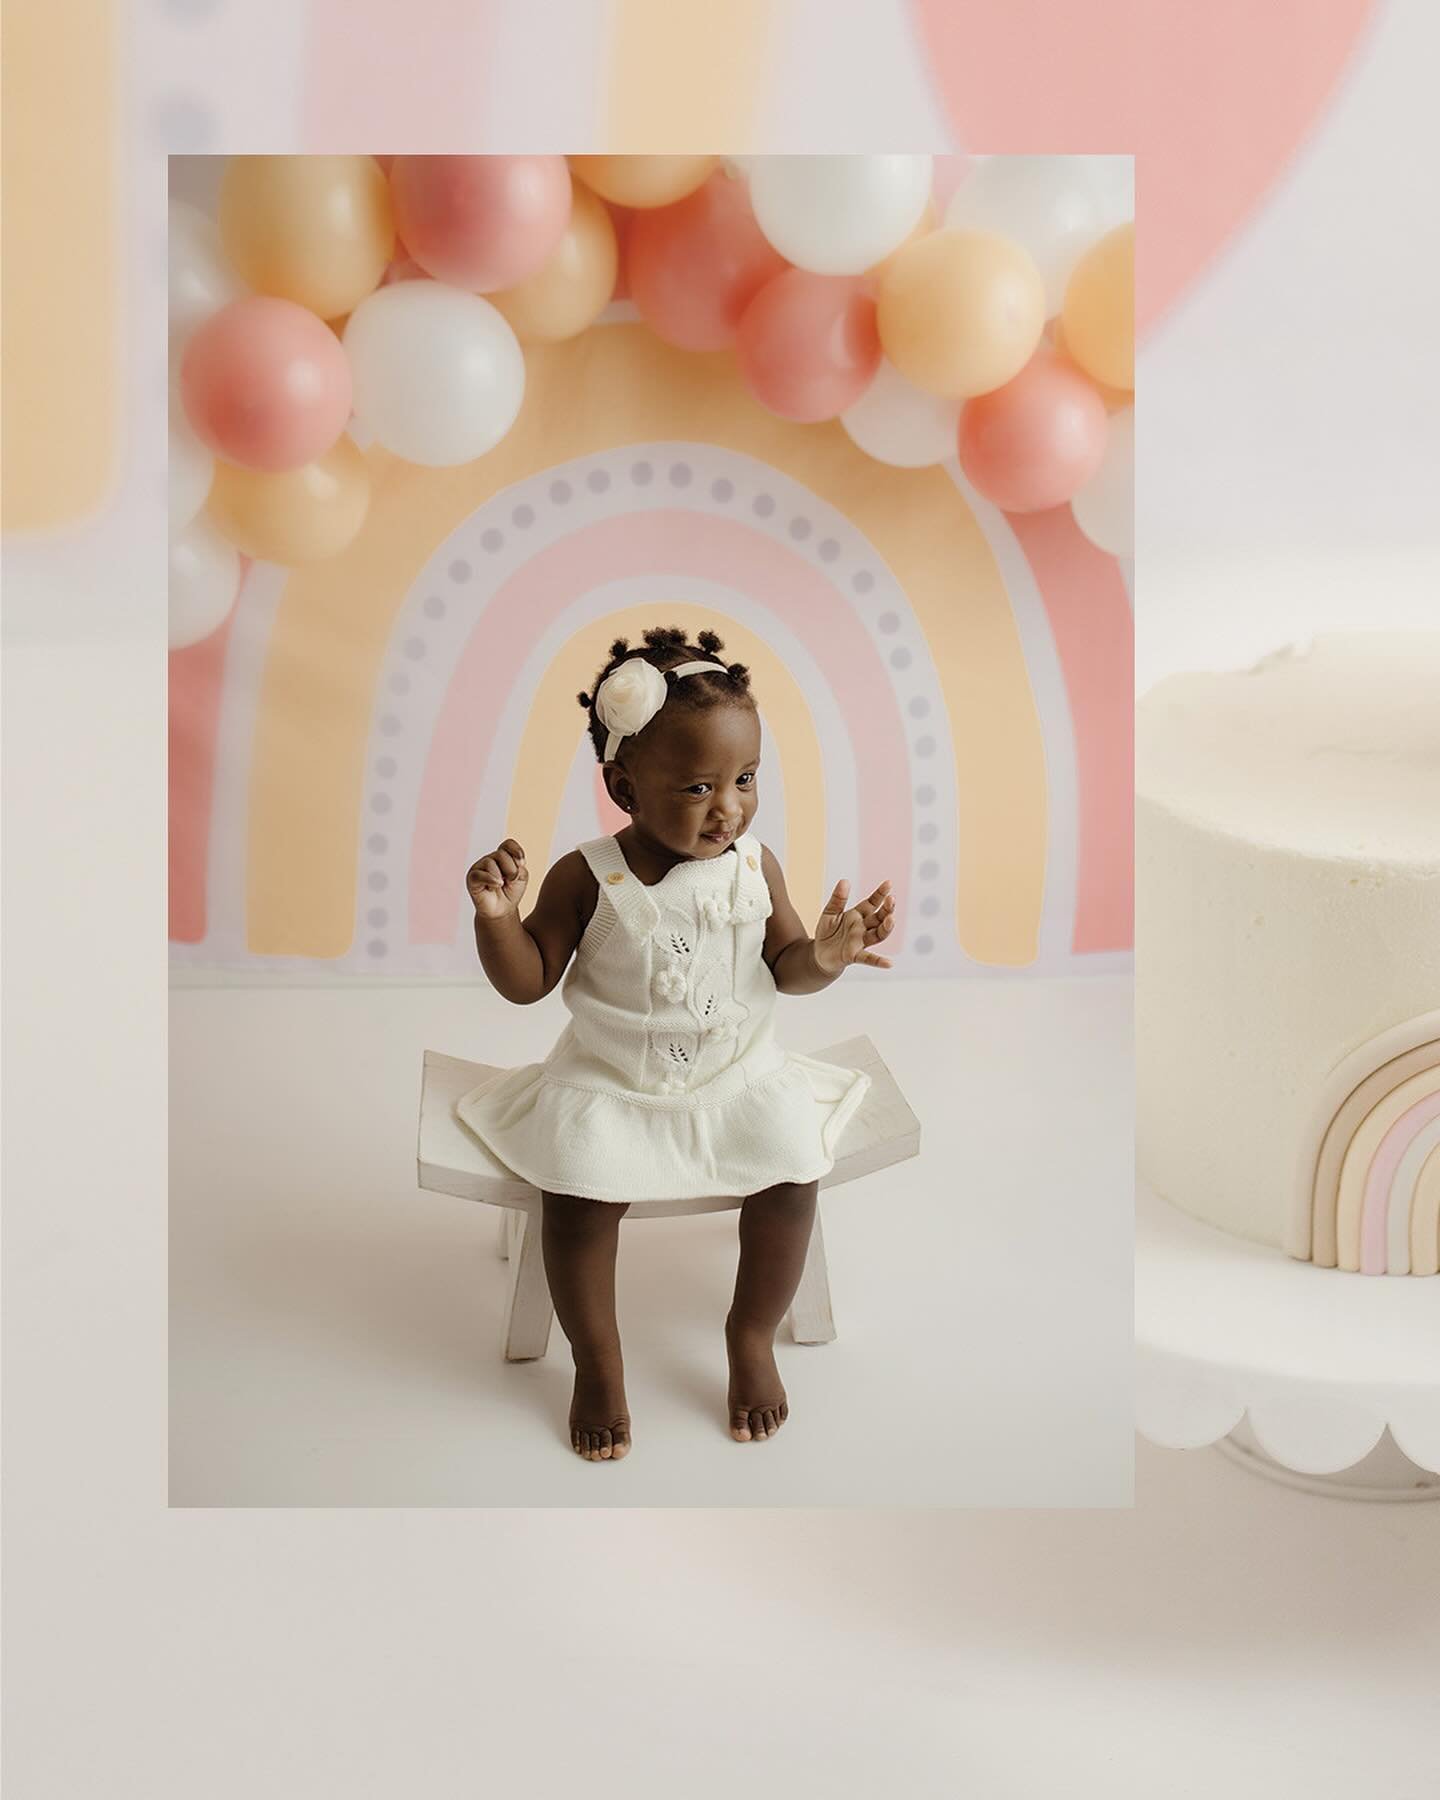 Wishing sweet baby Abigail a happy first birthday 🎉 Is your little one celebrating this milestone this summer or fall? Book a cake smash session today and let me take care of all the details including decor, custom balloon arch, cake and outfit for 